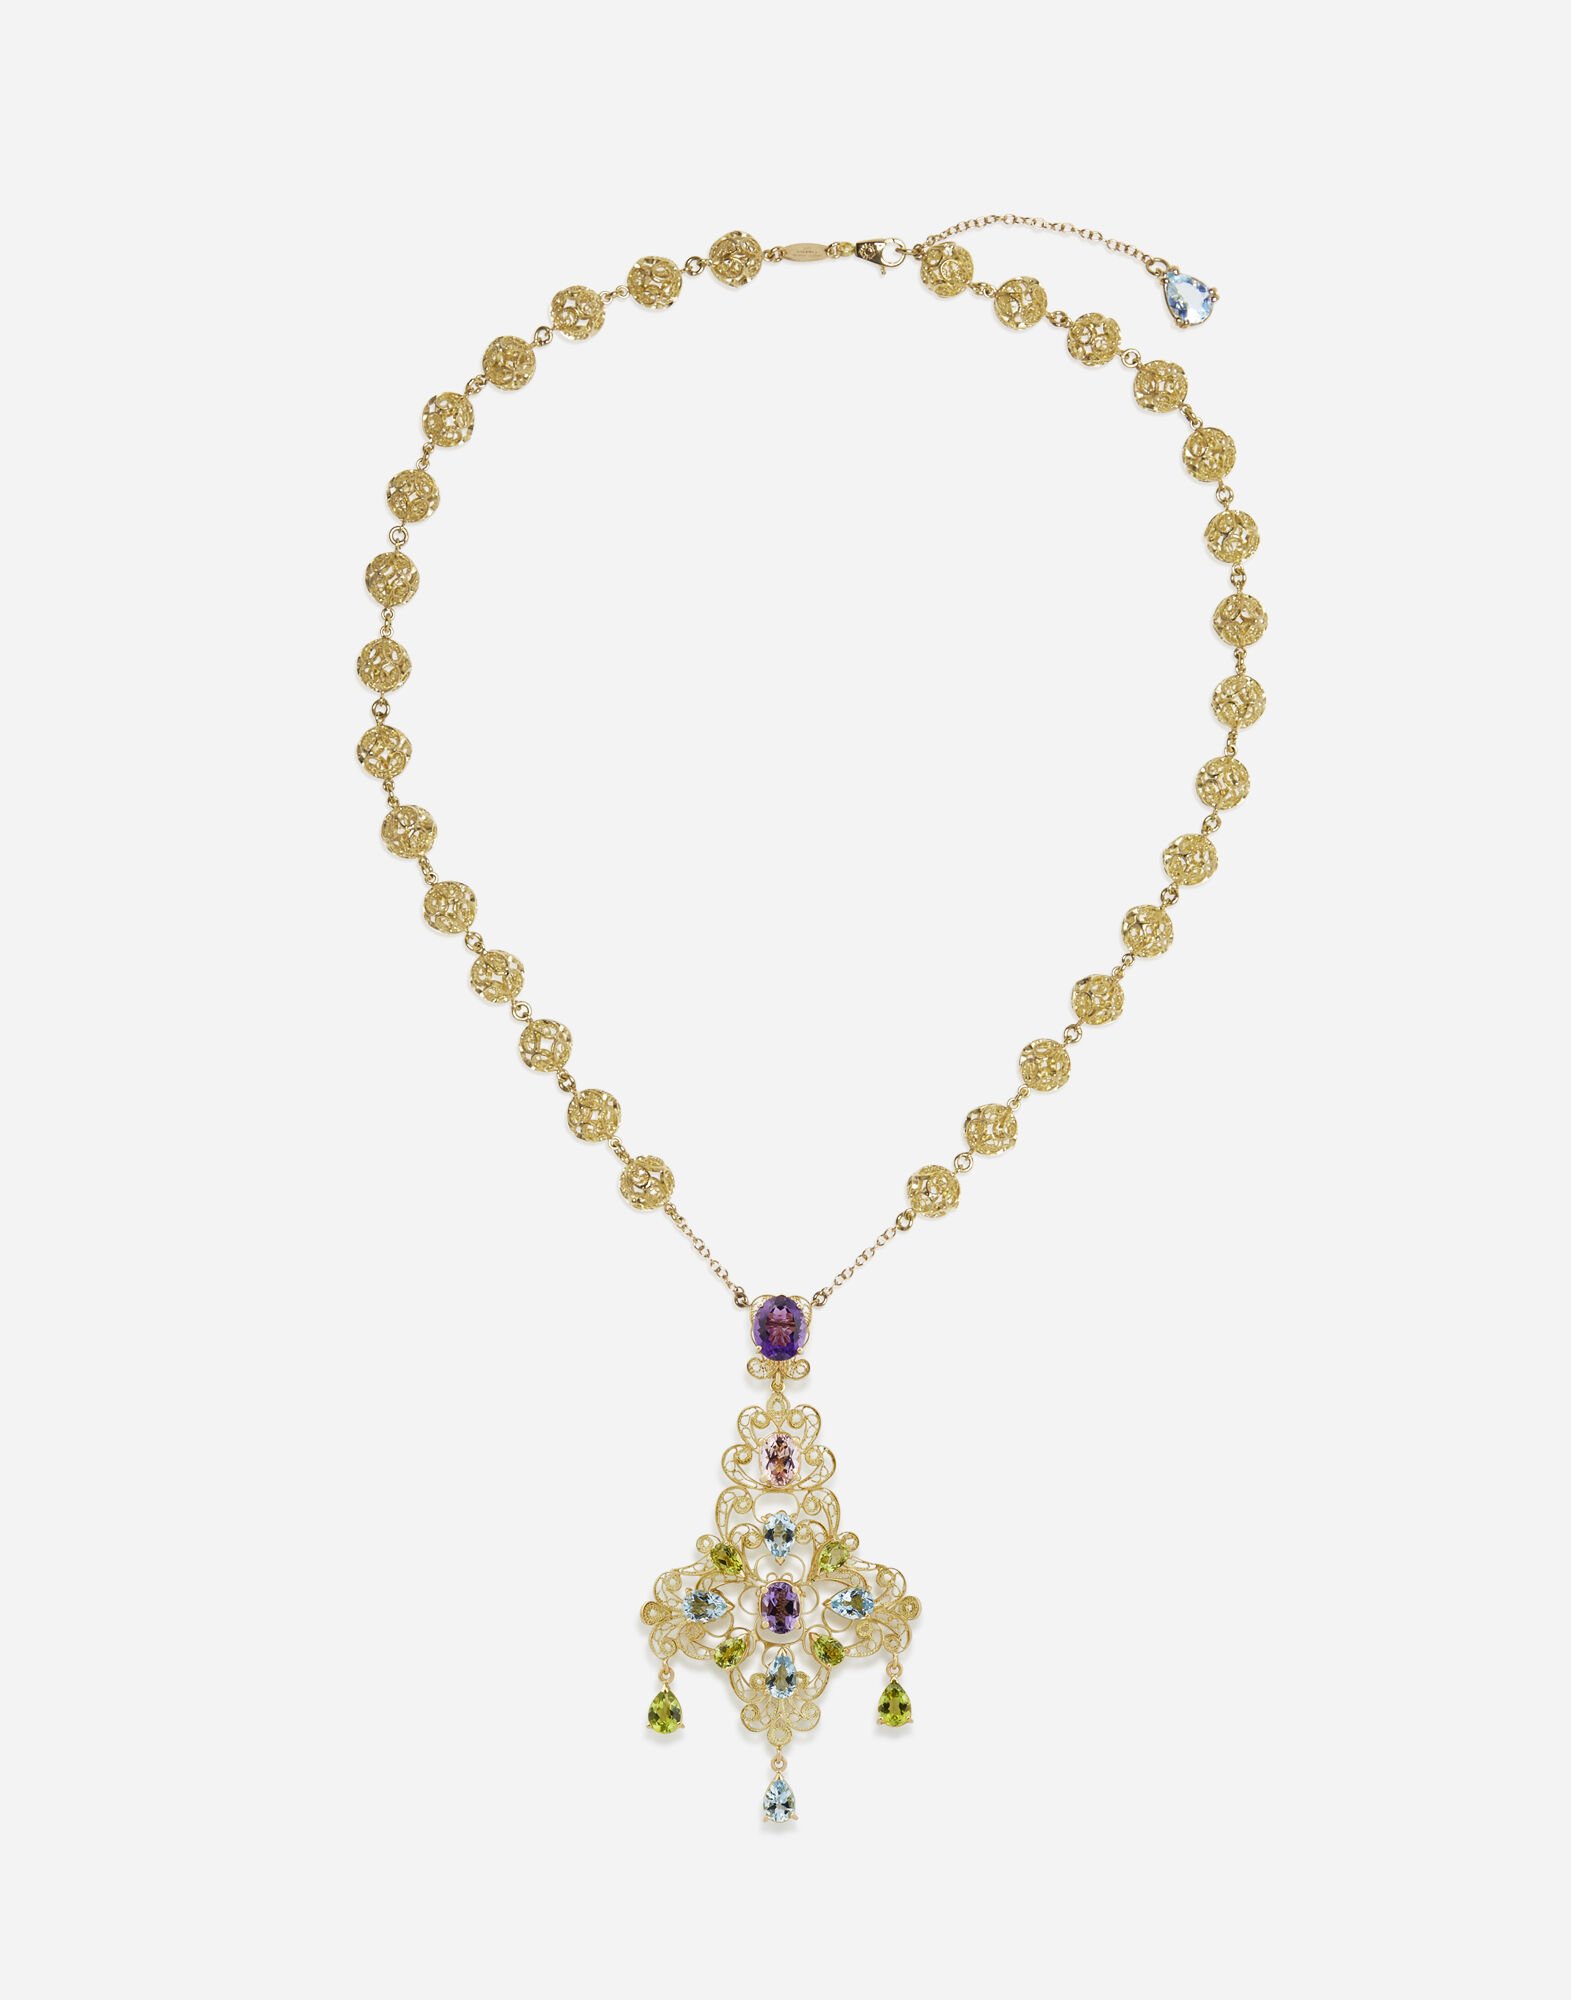 Dolce & Gabbana Pizzo necklace in yellow gold filigree with amethysts, aquamarines, peridots and morganite Black WWJS1SXR00S